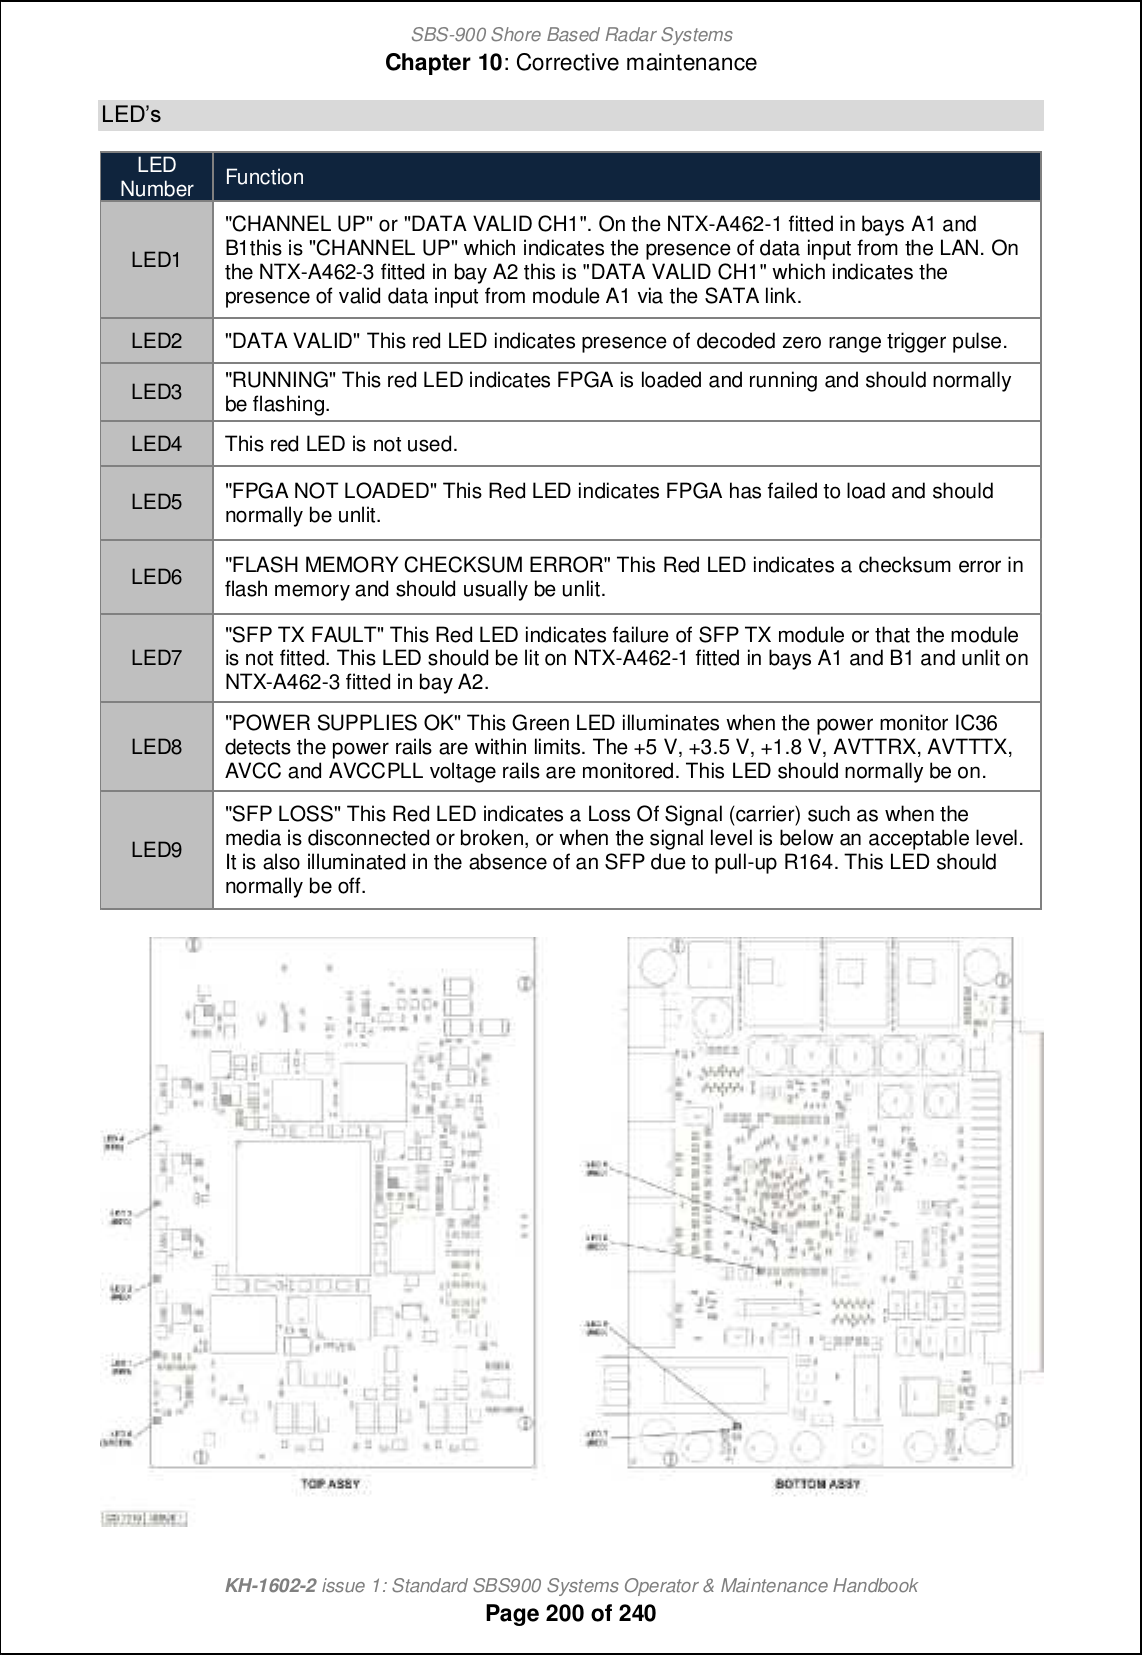 SBS-900 Shore Based Radar SystemsChapter 10: Corrective maintenanceKH-1602-2 issue 1: Standard SBS900 Systems Operator &amp; Maintenance HandbookPage 200 of 240KDCmLEDNumberFunctionLED1&quot;CHANNEL UP&quot; or &quot;DATA VALID CH1&quot;. On the NTX-A462-1 fitted in bays A1 andB1this is &quot;CHANNEL UP&quot; which indicates the presence of data input from the LAN. Onthe NTX-A462-3 fitted in bay A2 this is &quot;DATA VALID CH1&quot; which indicates thepresence of valid data input from module A1 via the SATA link.LED2 &quot;DATA VALID&quot; This red LED indicates presence of decoded zero range trigger pulse.LED3 &quot;RUNNING&quot; This red LED indicates FPGA is loaded and running and should normallybe flashing.LED4 This red LED is not used.LED5 &quot;FPGA NOT LOADED&quot; This Red LED indicates FPGA has failed to load and shouldnormally be unlit.LED6 &quot;FLASH MEMORY CHECKSUM ERROR&quot; This Red LED indicates a checksum error inflash memory and should usually be unlit.LED7 &quot;SFP TX FAULT&quot; This Red LED indicates failure of SFP TX module or that the moduleis not fitted. This LED should be lit on NTX-A462-1 fitted in bays A1 and B1 and unlit onNTX-A462-3 fitted in bay A2.LED8 &quot;POWER SUPPLIES OK&quot; This Green LED illuminates when the power monitor IC36detects the power rails are within limits. The +5 V, +3.5 V, +1.8 V, AVTTRX, AVTTTX,AVCC and AVCCPLL voltage rails are monitored. This LED should normally be on.LED9&quot;SFP LOSS&quot; This Red LED indicates a Loss Of Signal (carrier) such as when themedia is disconnected or broken, or when the signal level is below an acceptable level.It is also illuminated in the absence of an SFP due to pull-up R164. This LED shouldnormally be off.